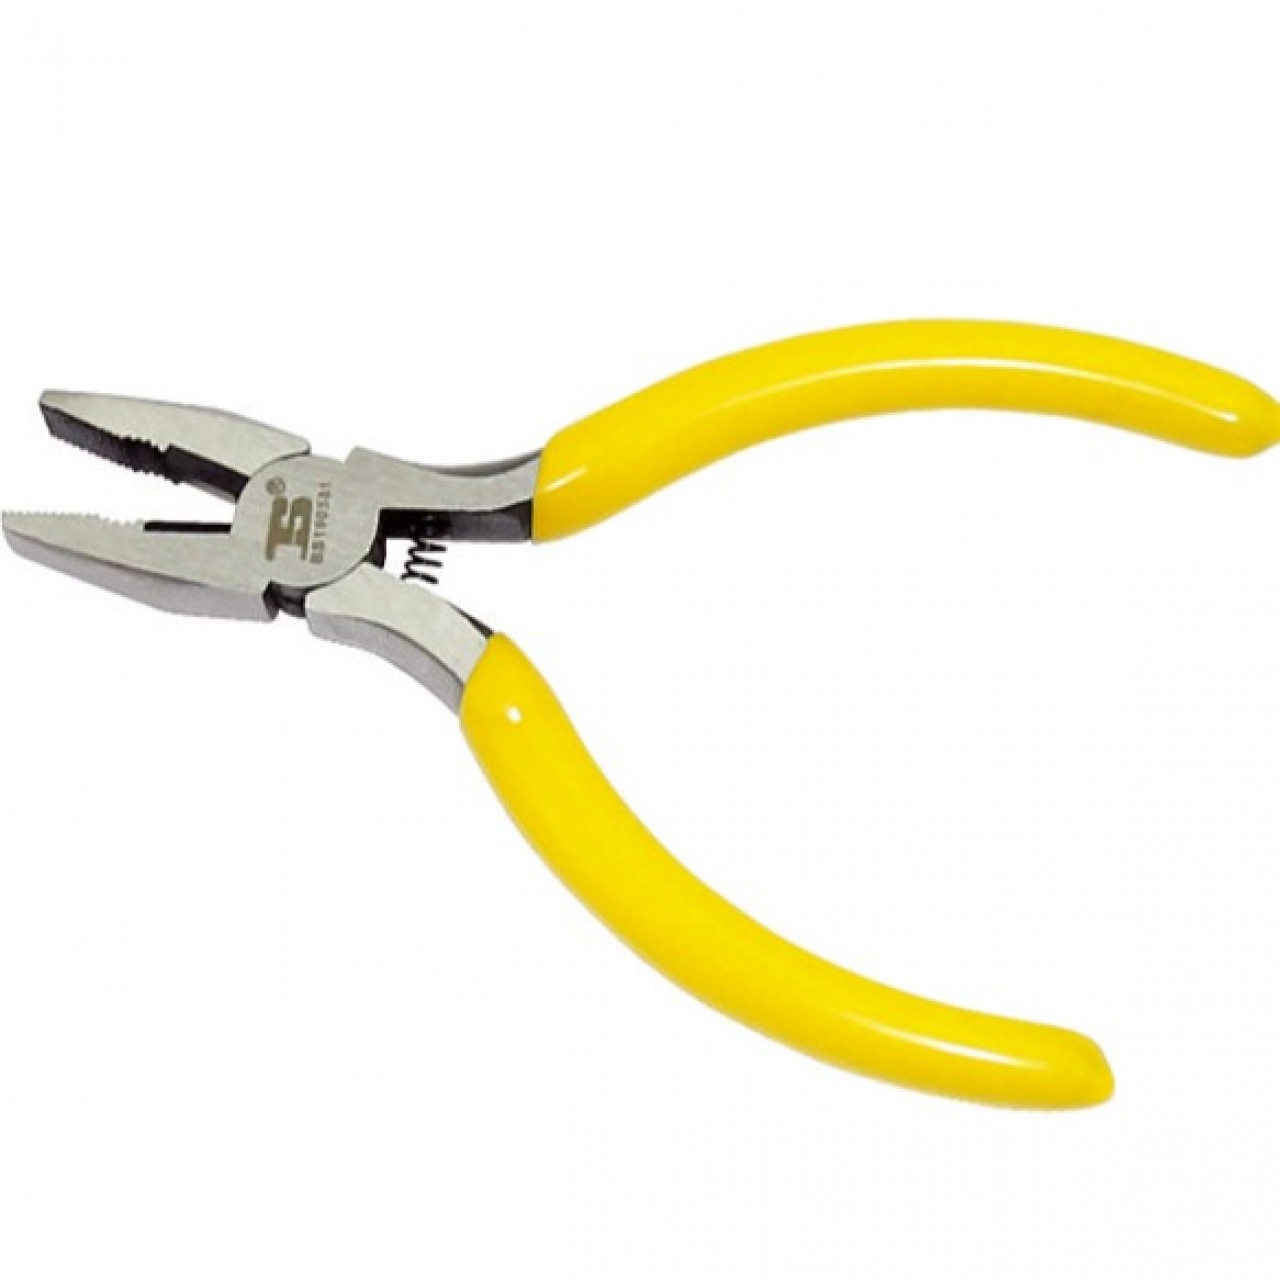 BOSI Mini Long Nose Pliers For Personal And Professional Use BS190582 - 5"/125MM